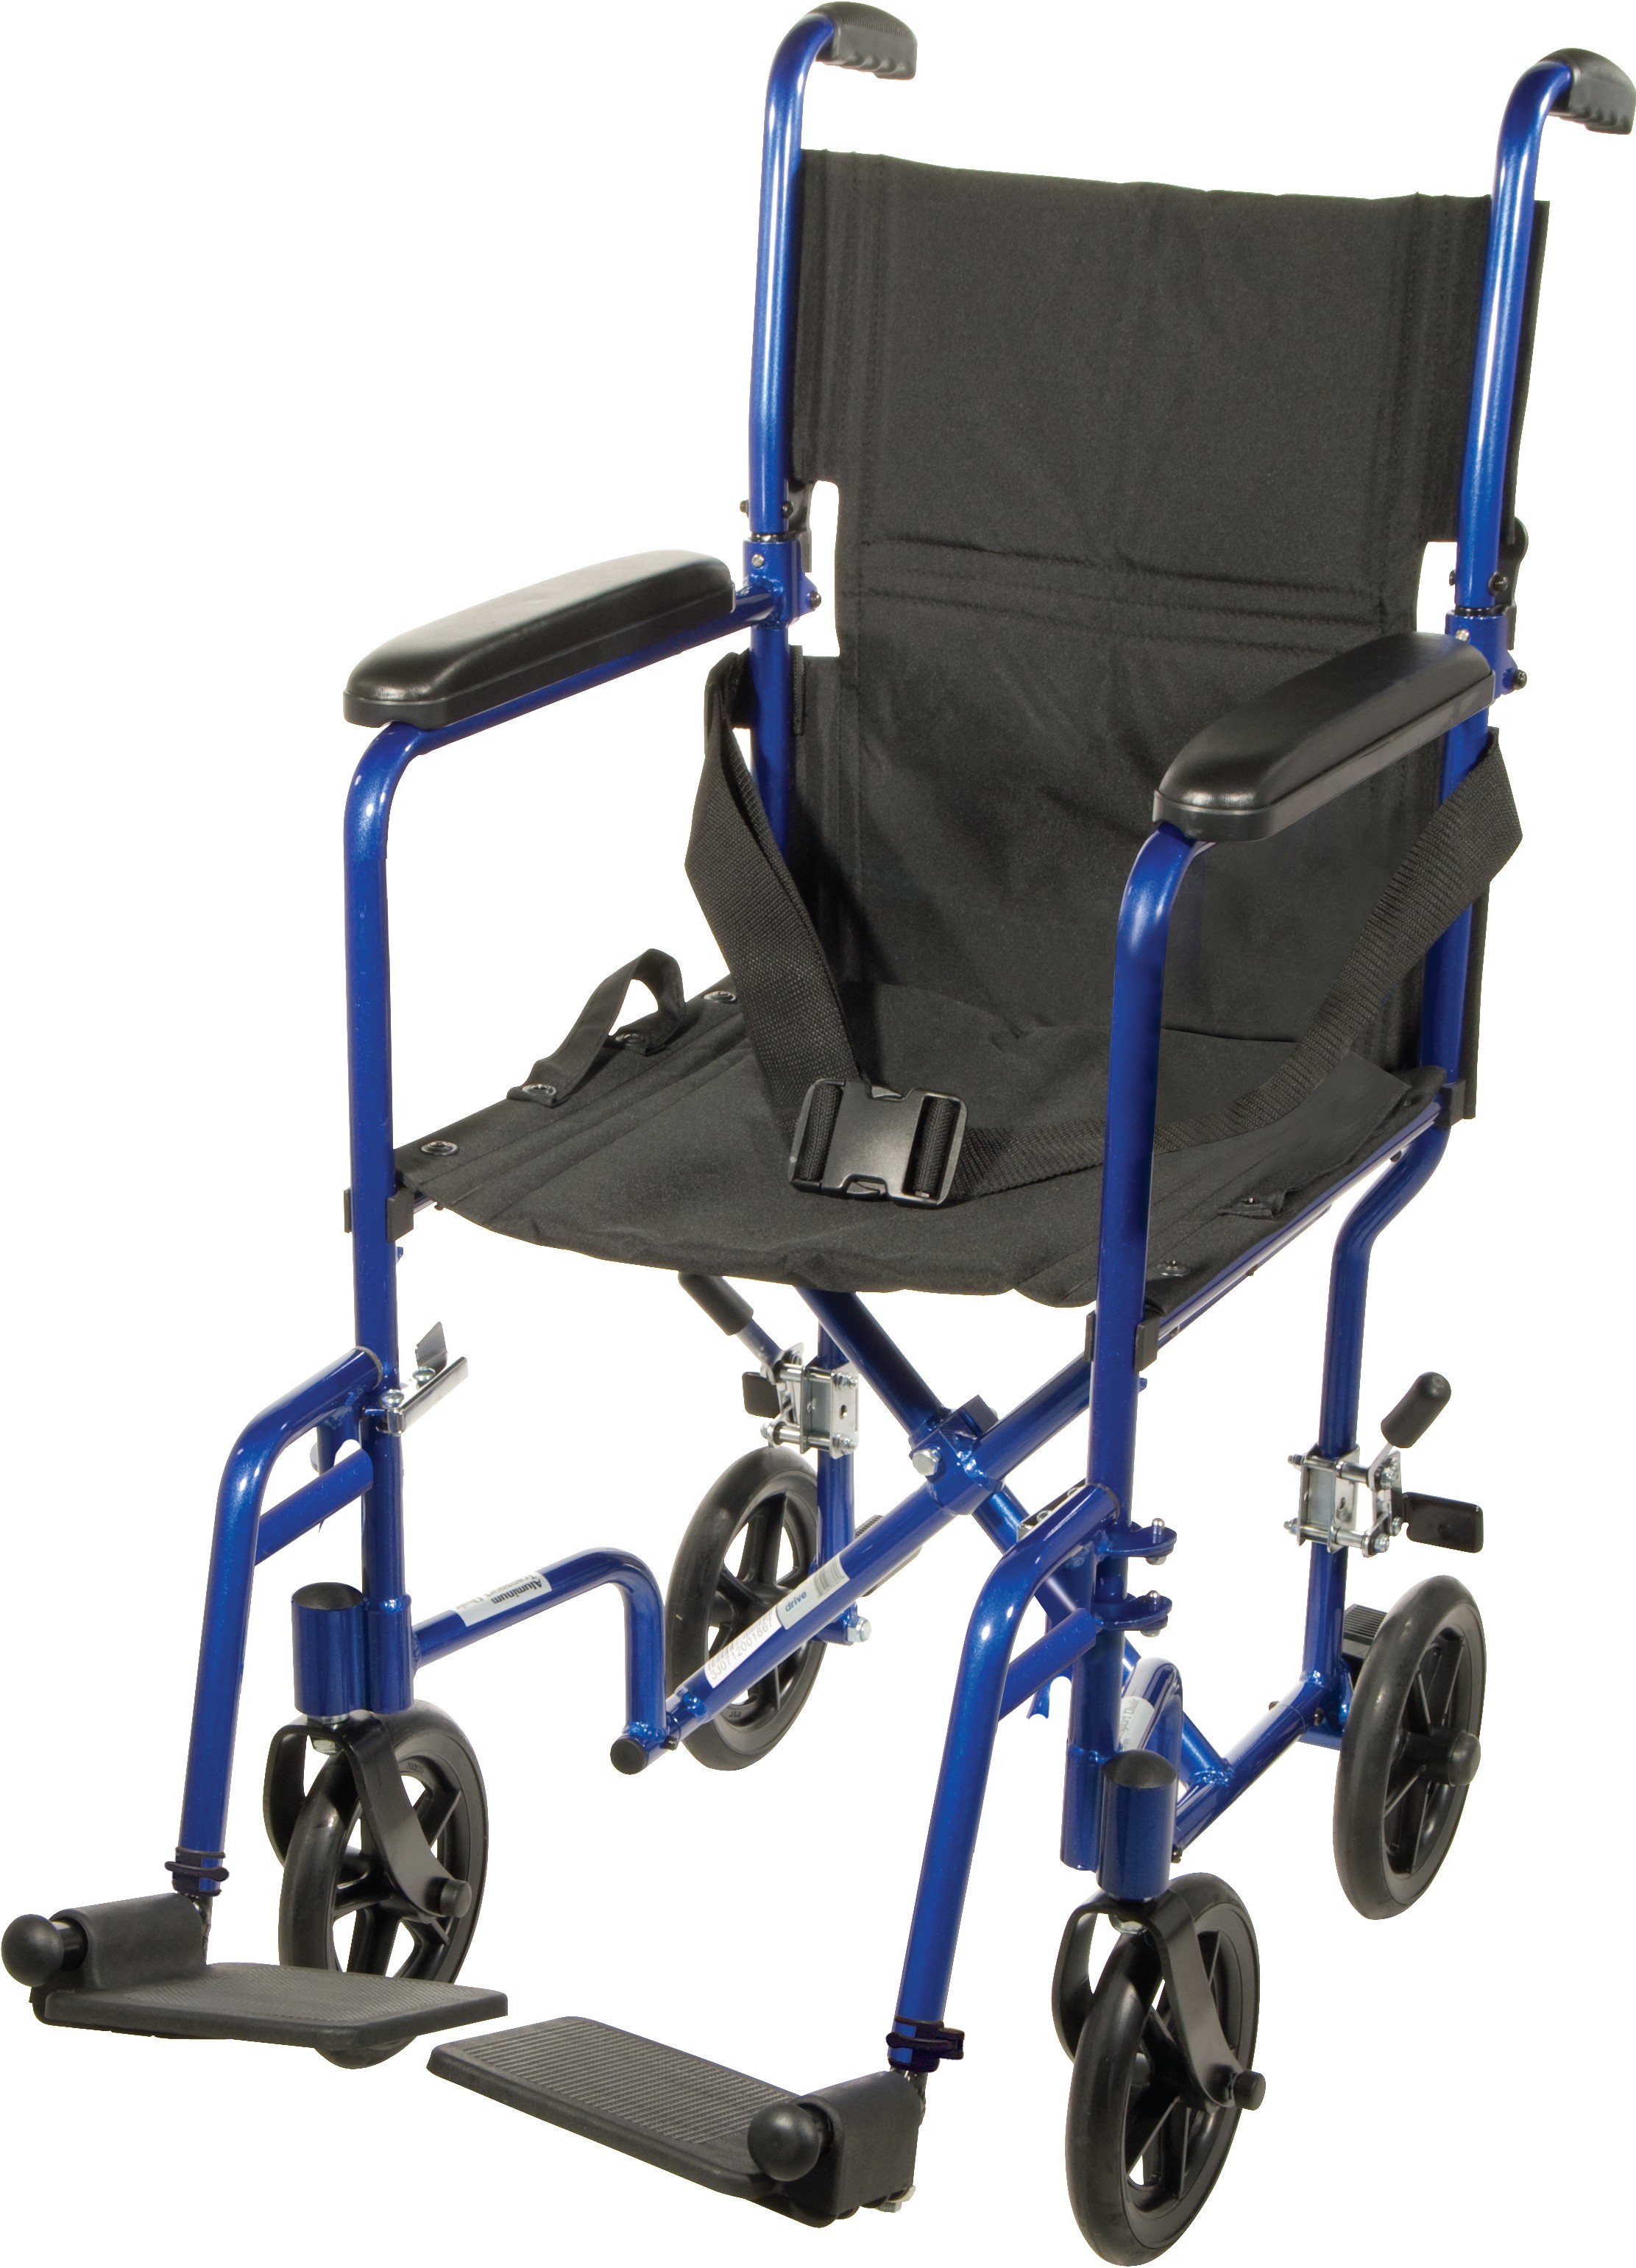 Wheelchair Rental Stores in Atlanta-Call Now for Same Day Delivery.